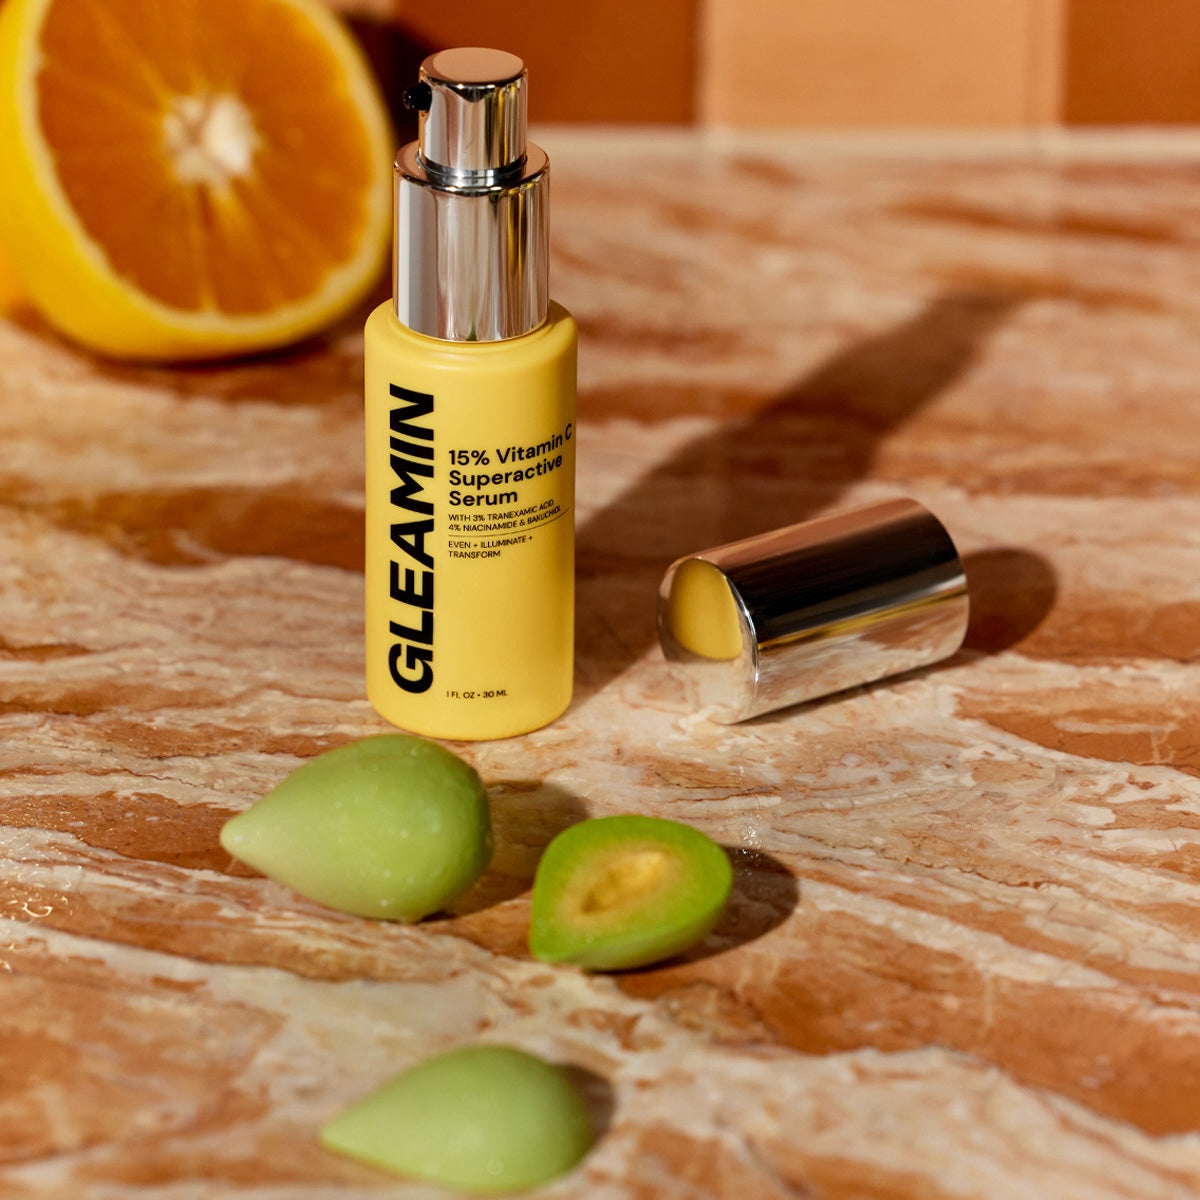 Gleamin serum and ingredients